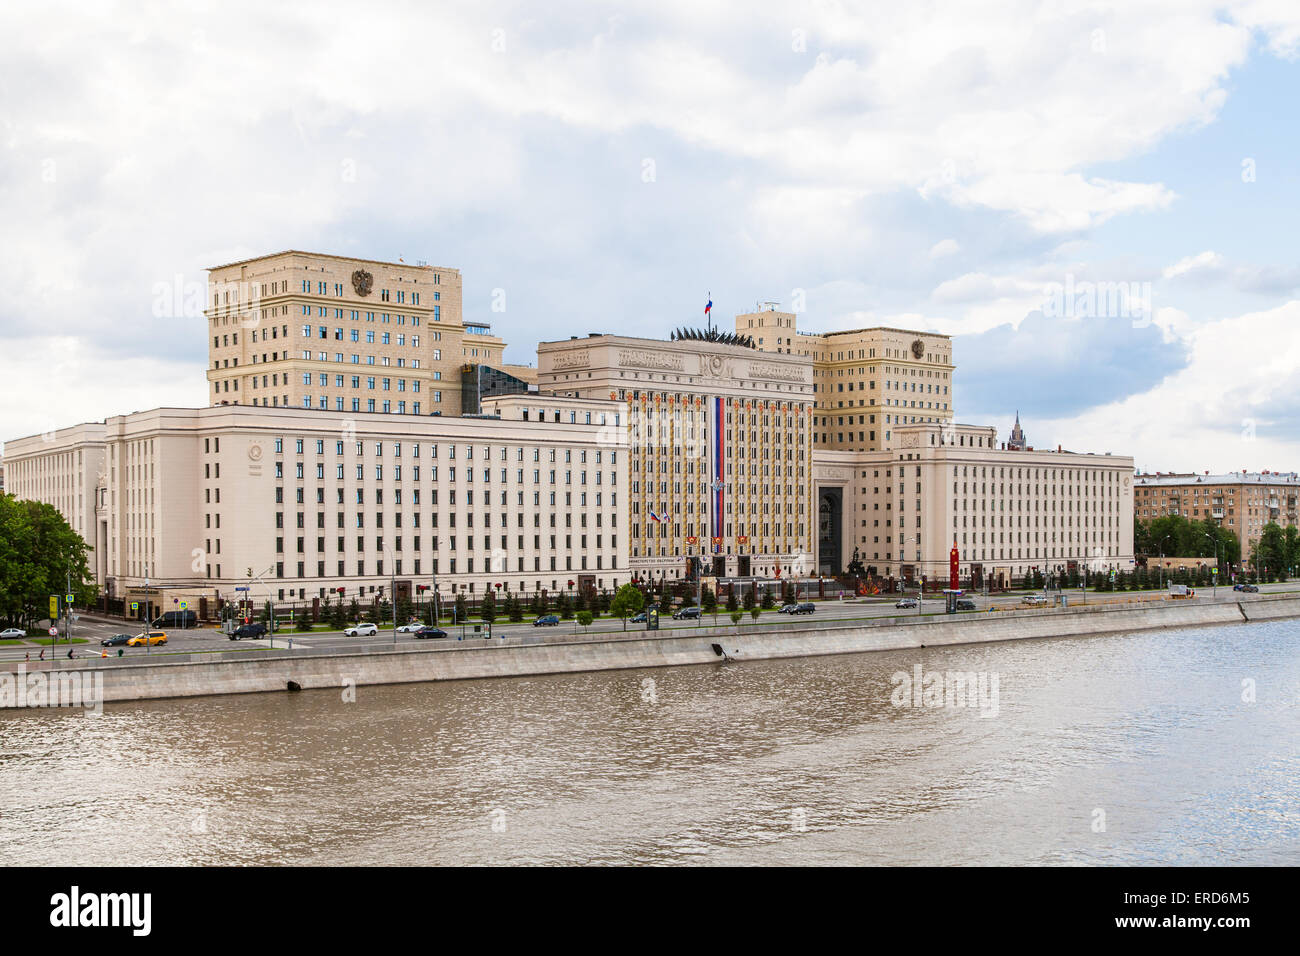 MOSCOW, RUSSIA - MAY 30, 2015: headquarters of the Ministry of Defense of Russia on Frunzenskaya embankment in Moscow, Russia Stock Photo